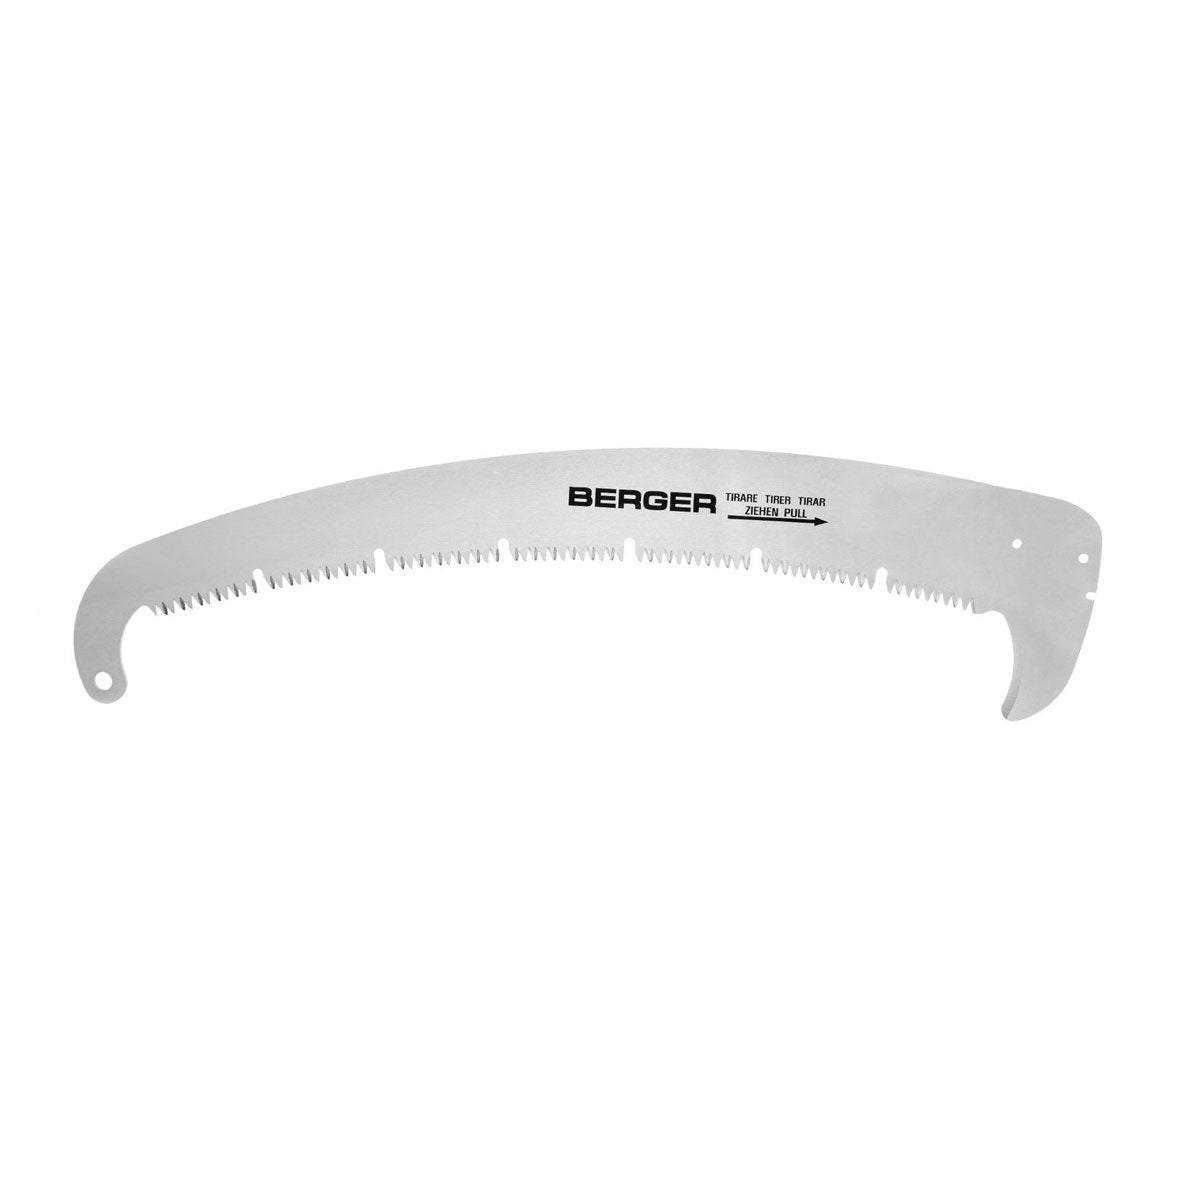 Berger 93952 Saw Blade for 63952